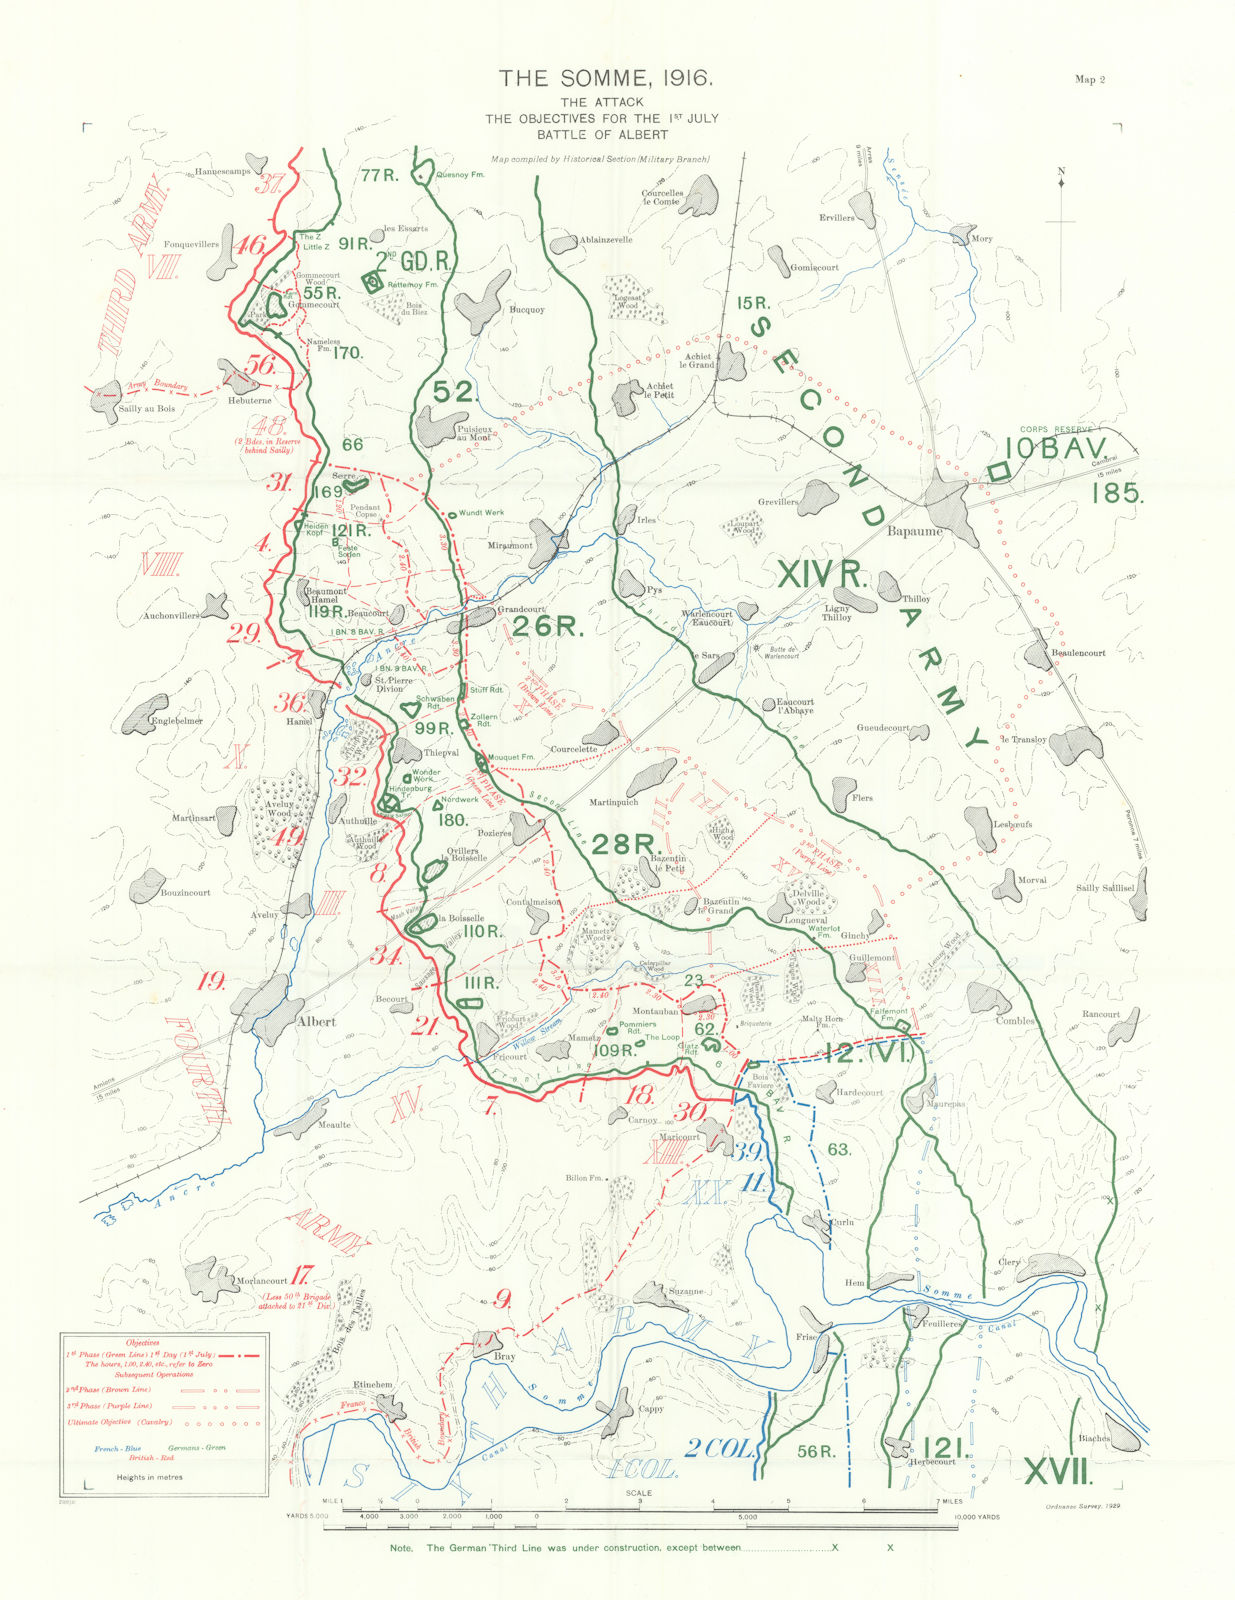 Somme, 1st July 1916. Attack & Objectives, Battle of Albert. Trenches 1932 map